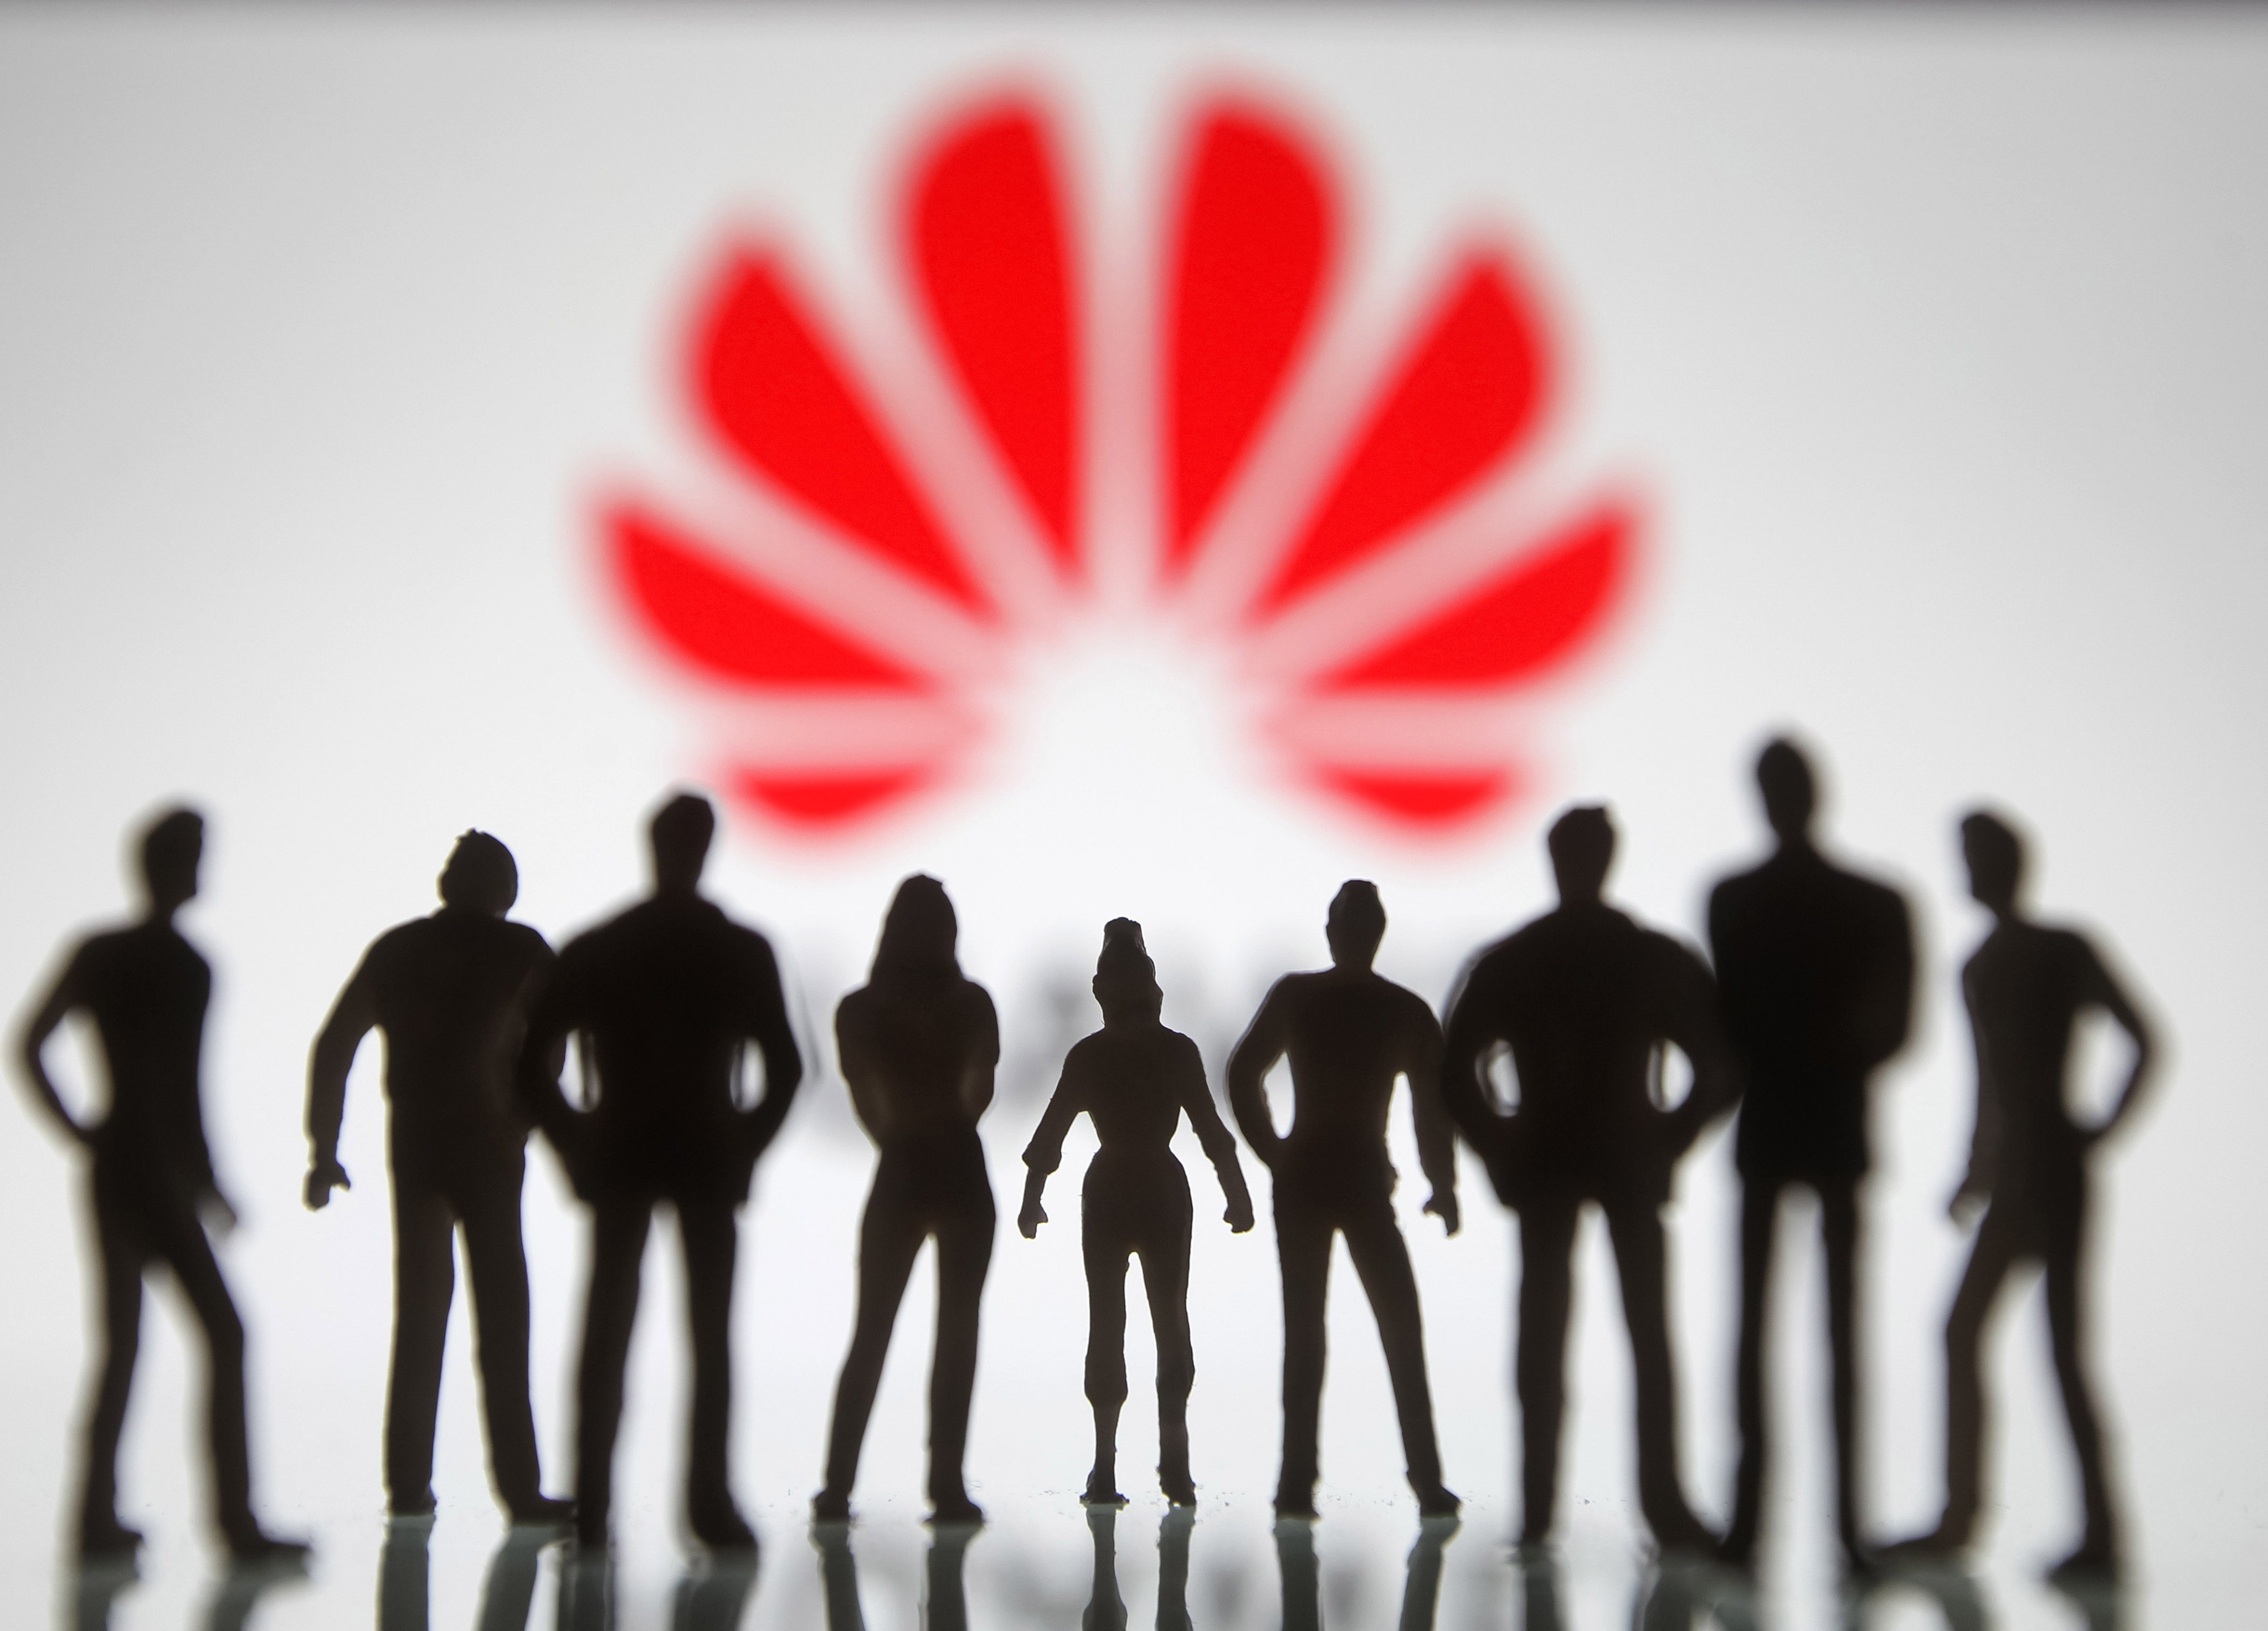 Huawei Technologies Co has described its self-developed business management system, MetaERP, as “the most extensive and complex transformation project” ever undertaken by the Chinese tech giant, involving several thousand employees and corporate partners. Photo: Shutterstock